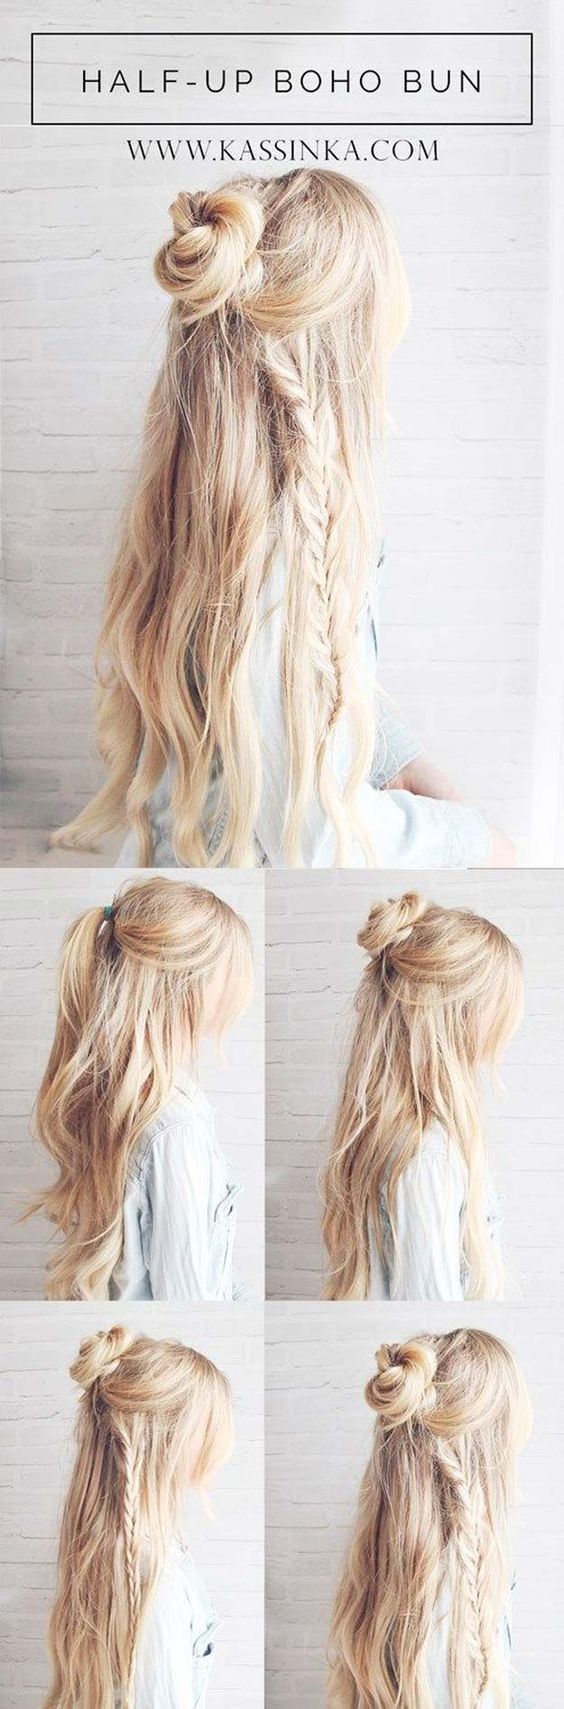 Best Hairstyles for Long Hair – Boho Braided Bun Hair – Step by Step Tutorials for Easy Curls, Updo, Half Up, Braids and Lazy Girl